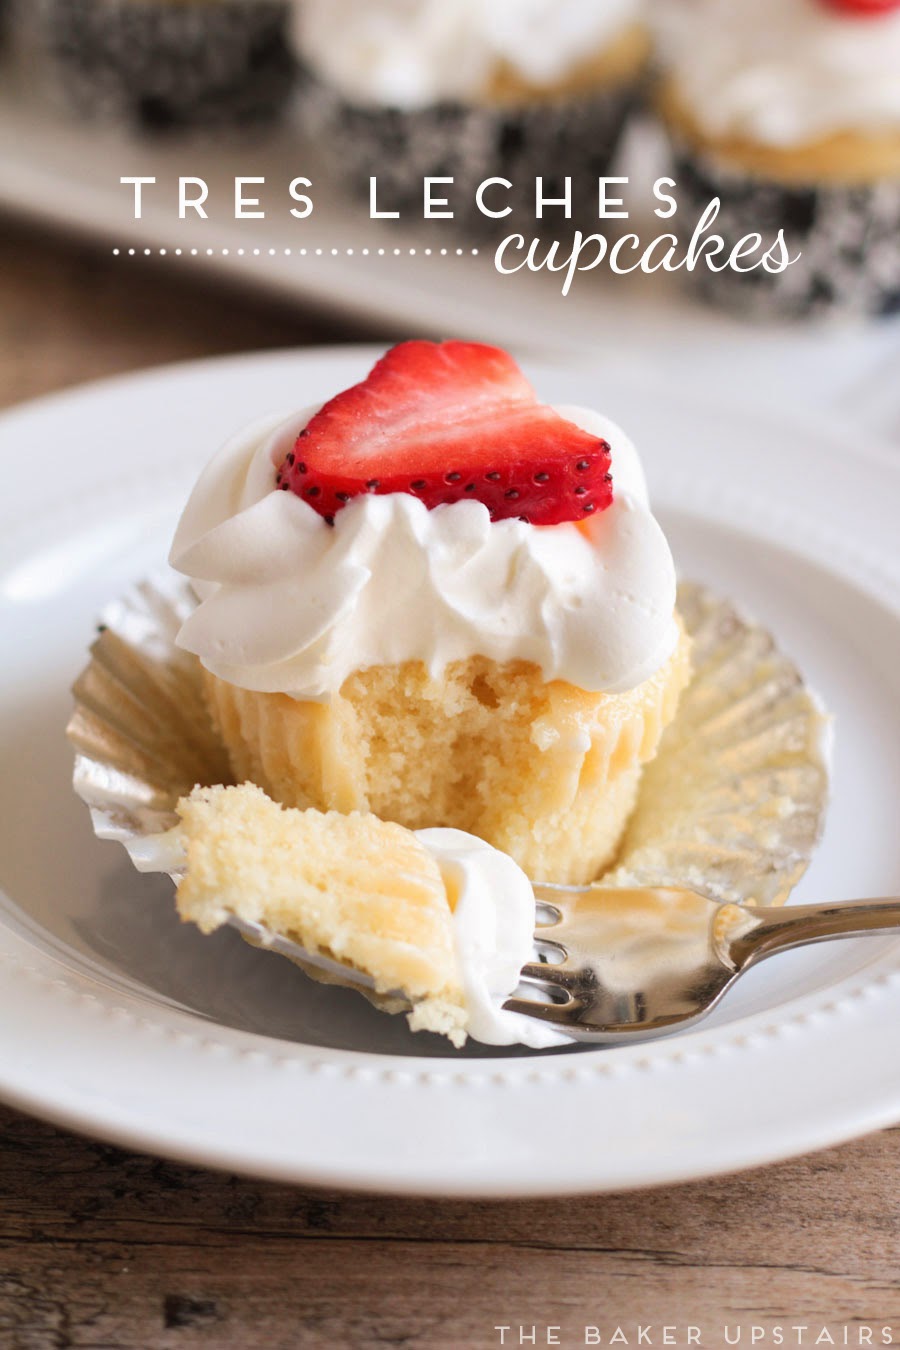 These tres leches cupcakes are so moist and flavorful, topped with lightly sweetened whipped cream and fresh strawberries. So, so good!